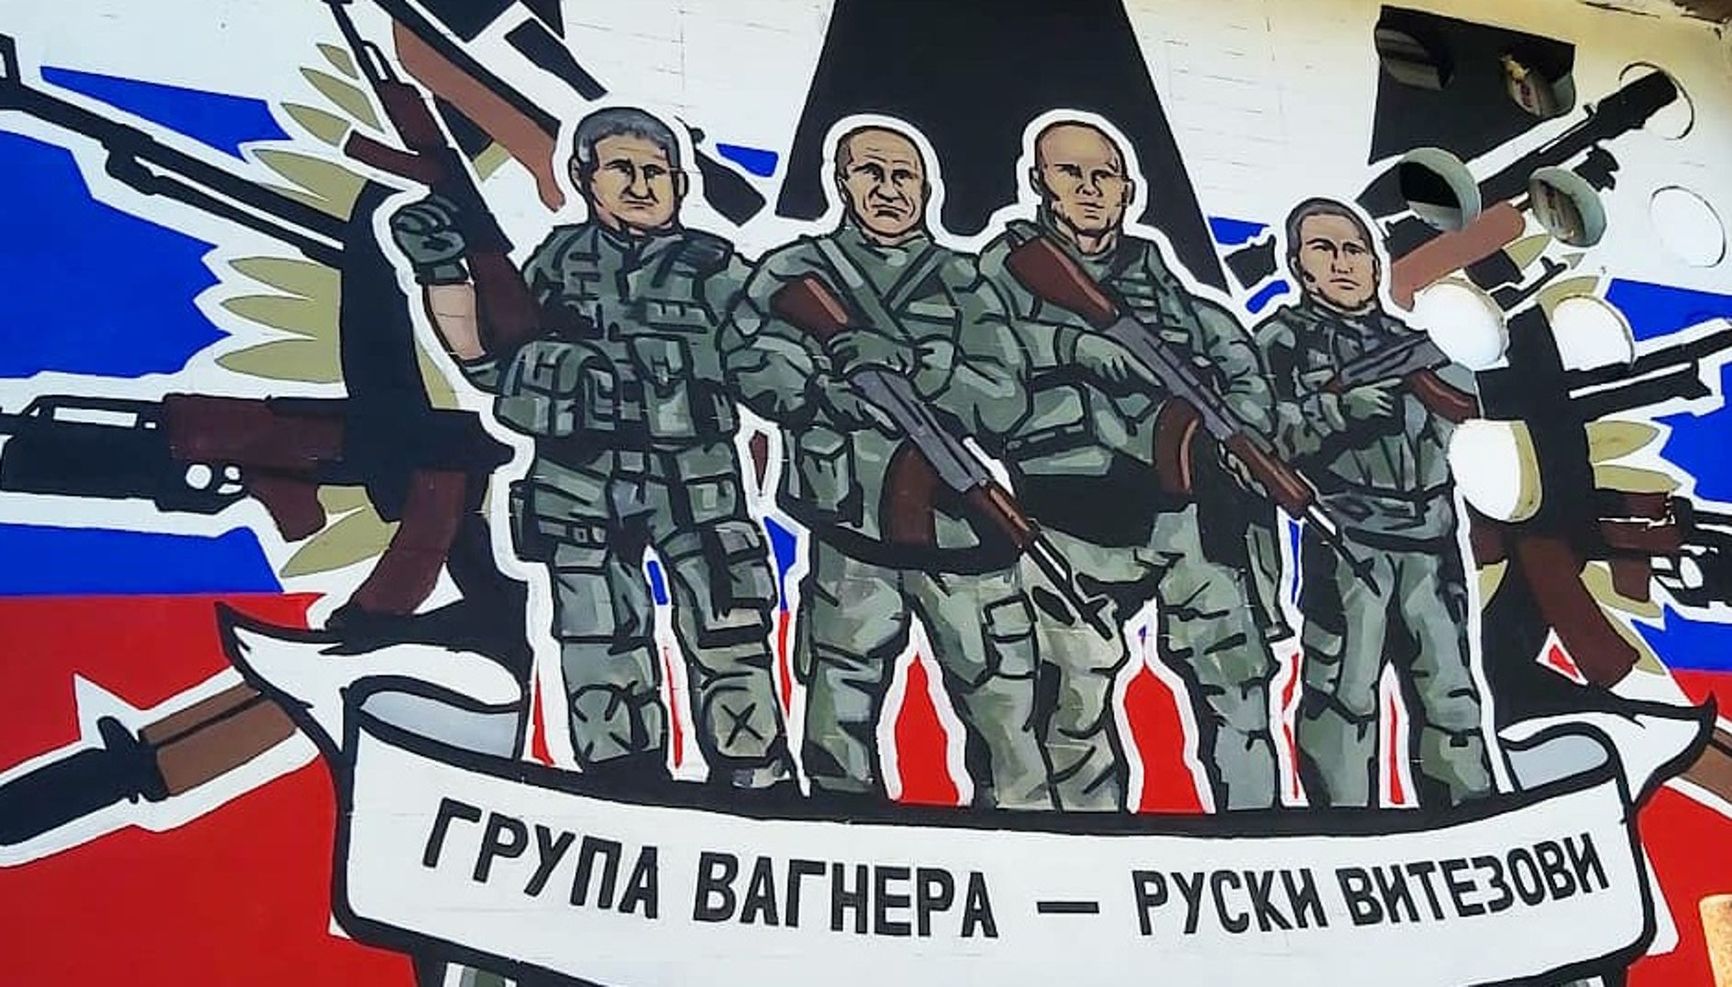 Mural of the Serbian Right